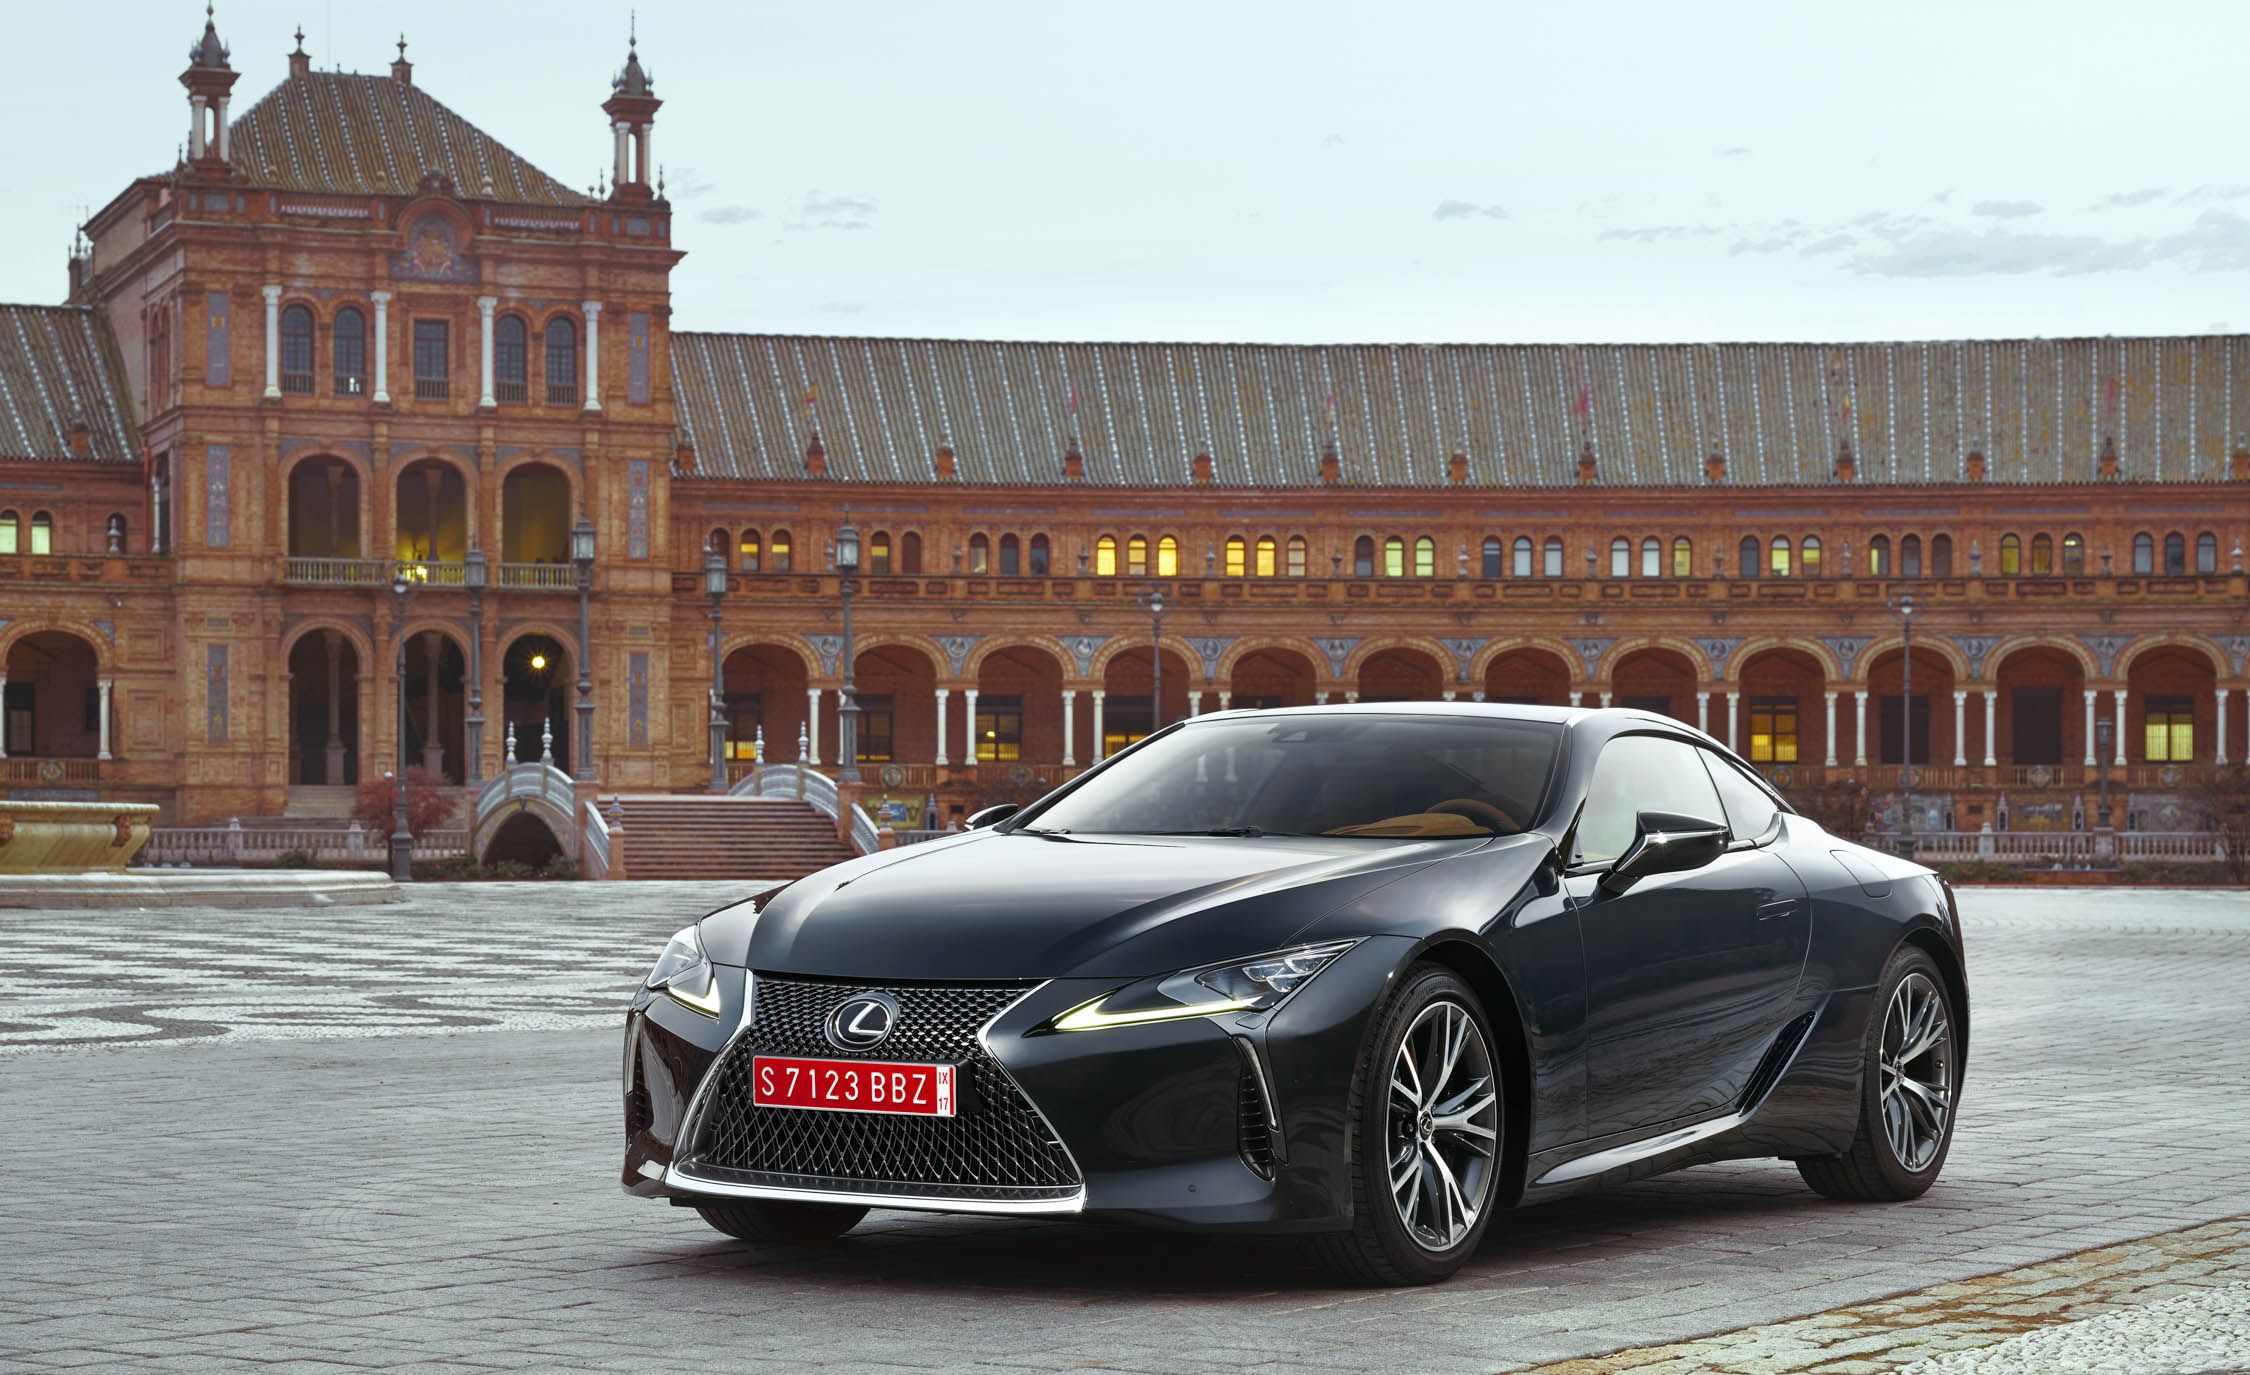 2018 Lexus Lc 500 Black Exterior Front And Side (View 65 of 84)